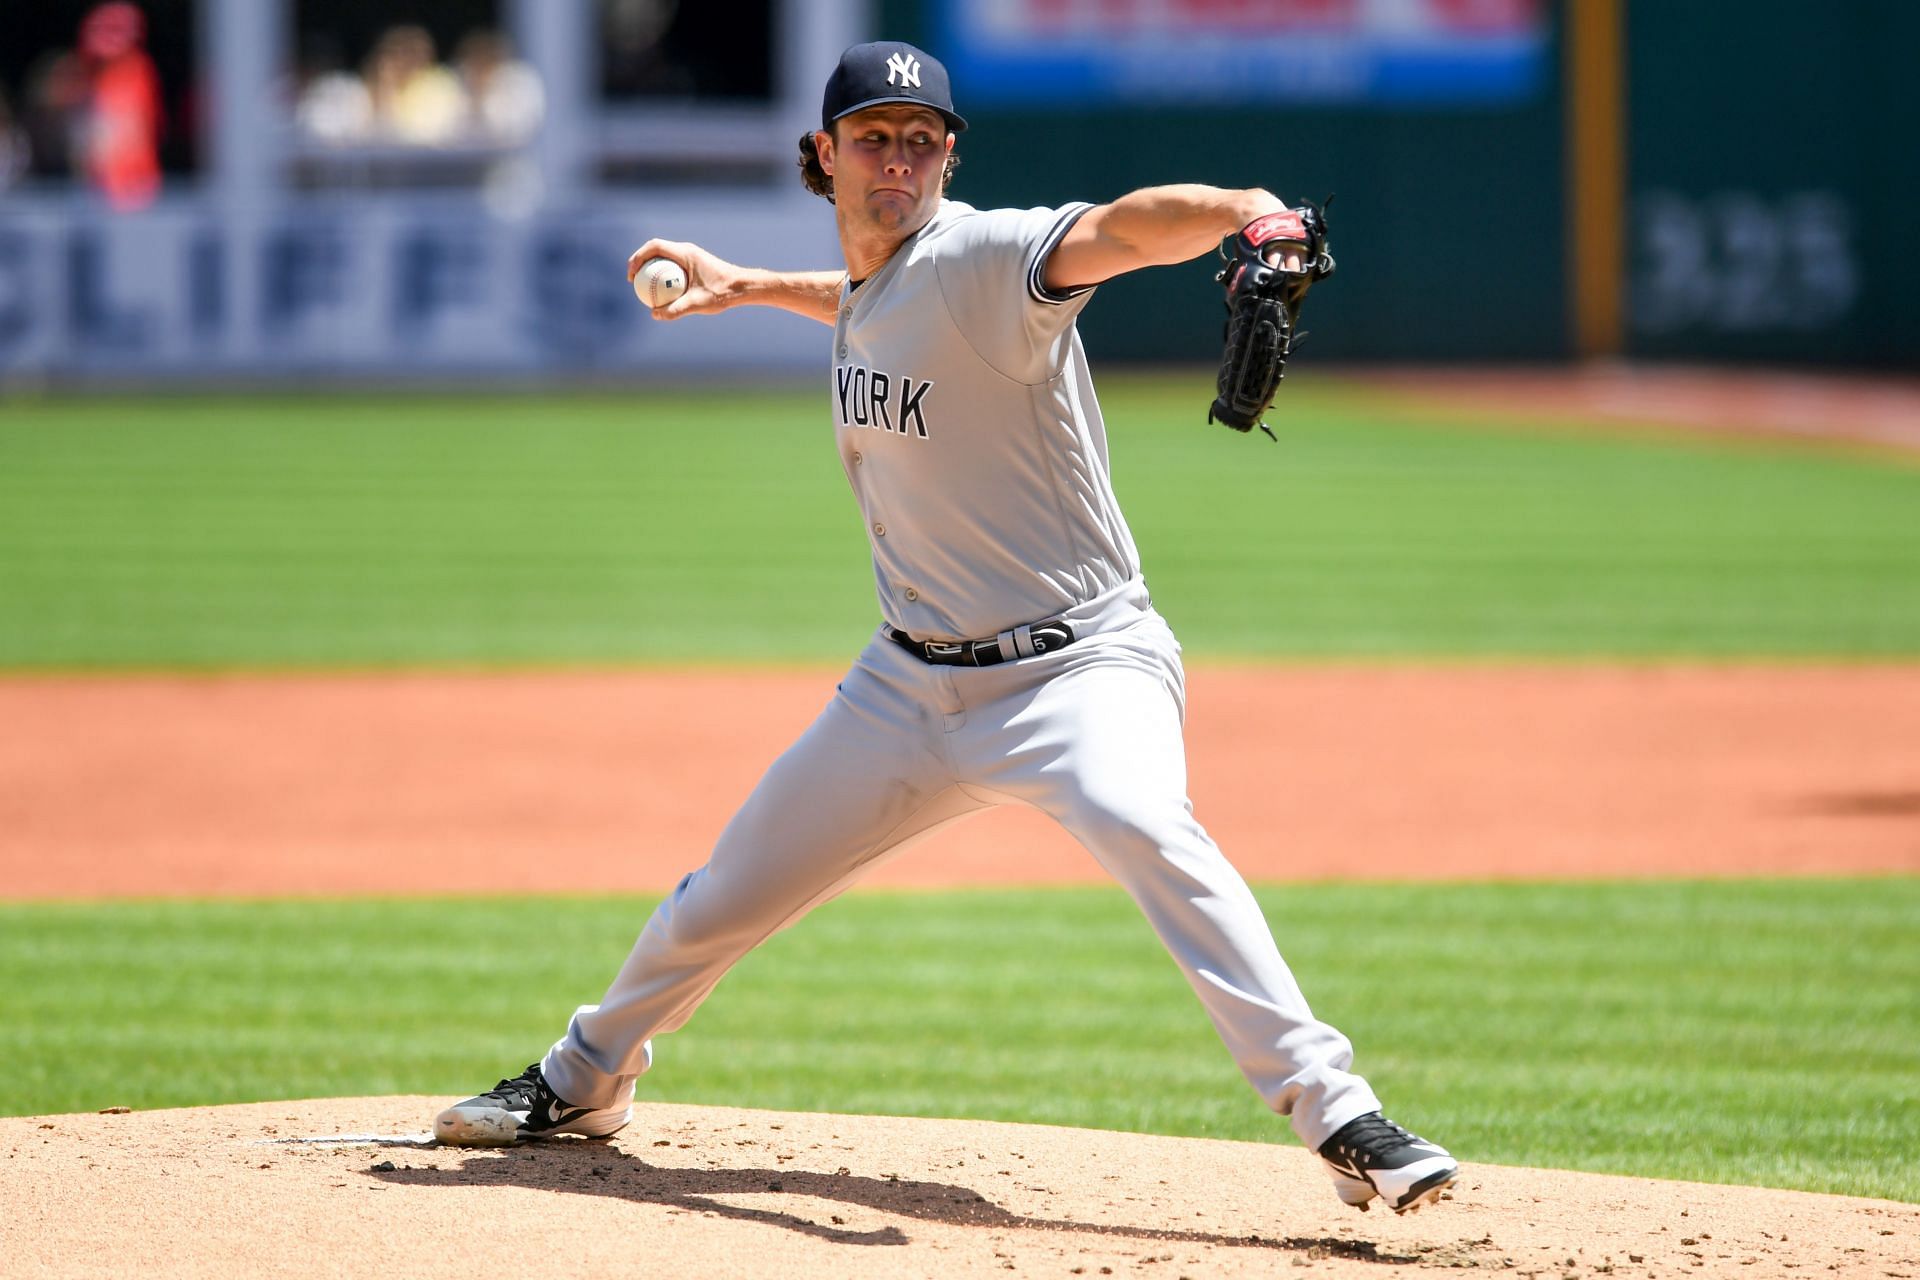 New York Yankees starting pitcher Gerrit Cole flips his hair back